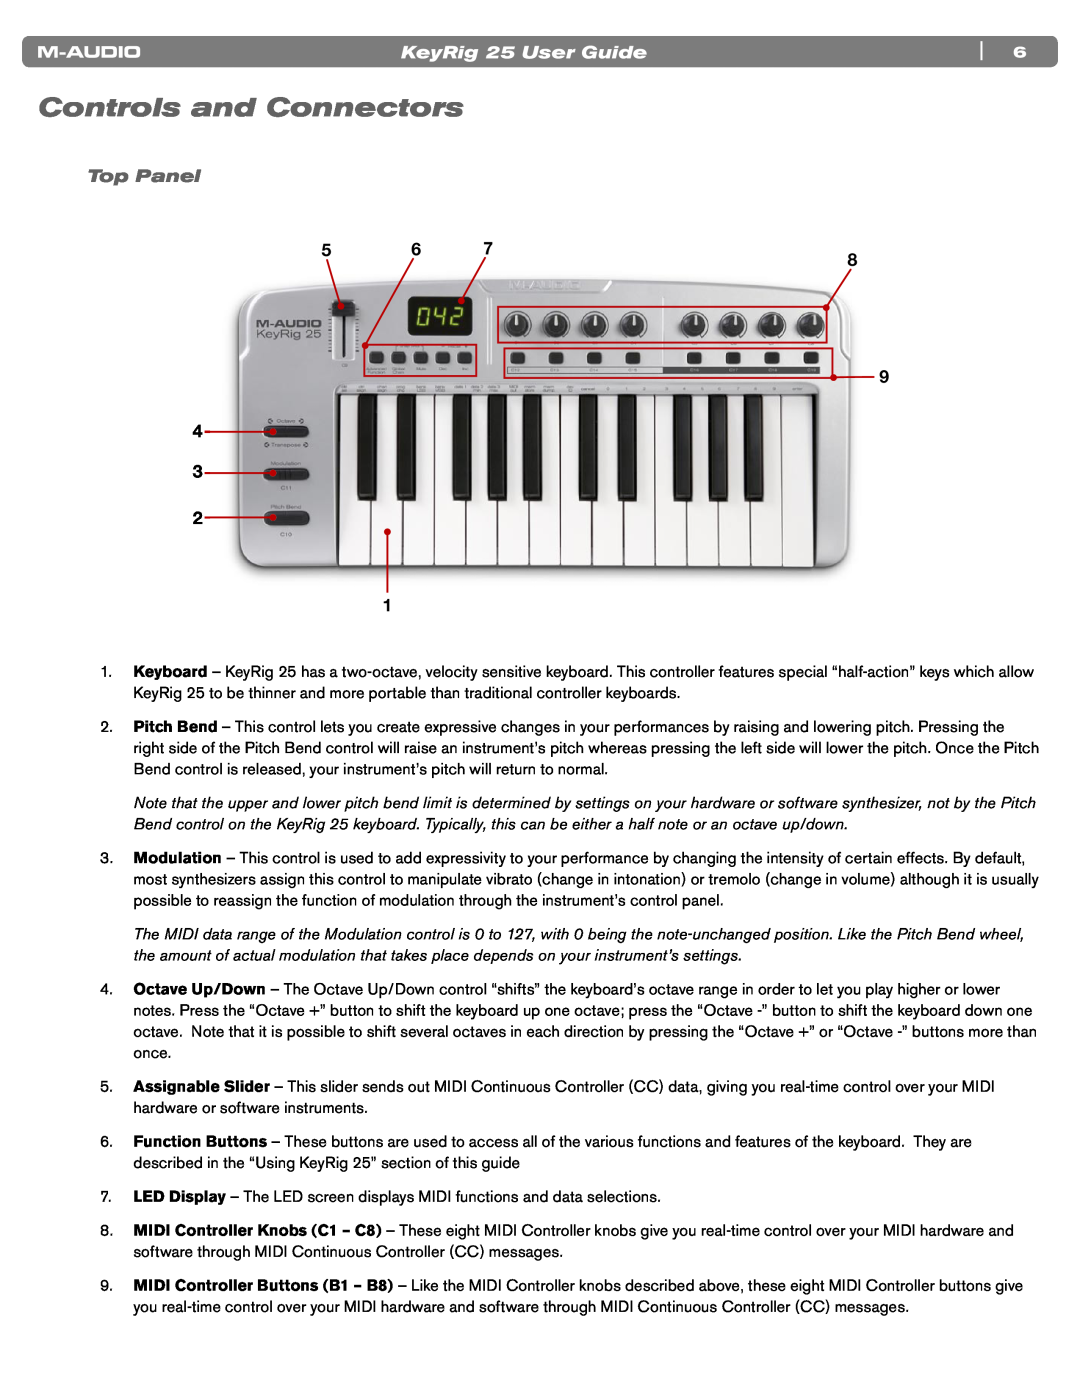 M-Audio manual Controls and Connectors, Top Panel, KeyRig 25 User Guide 